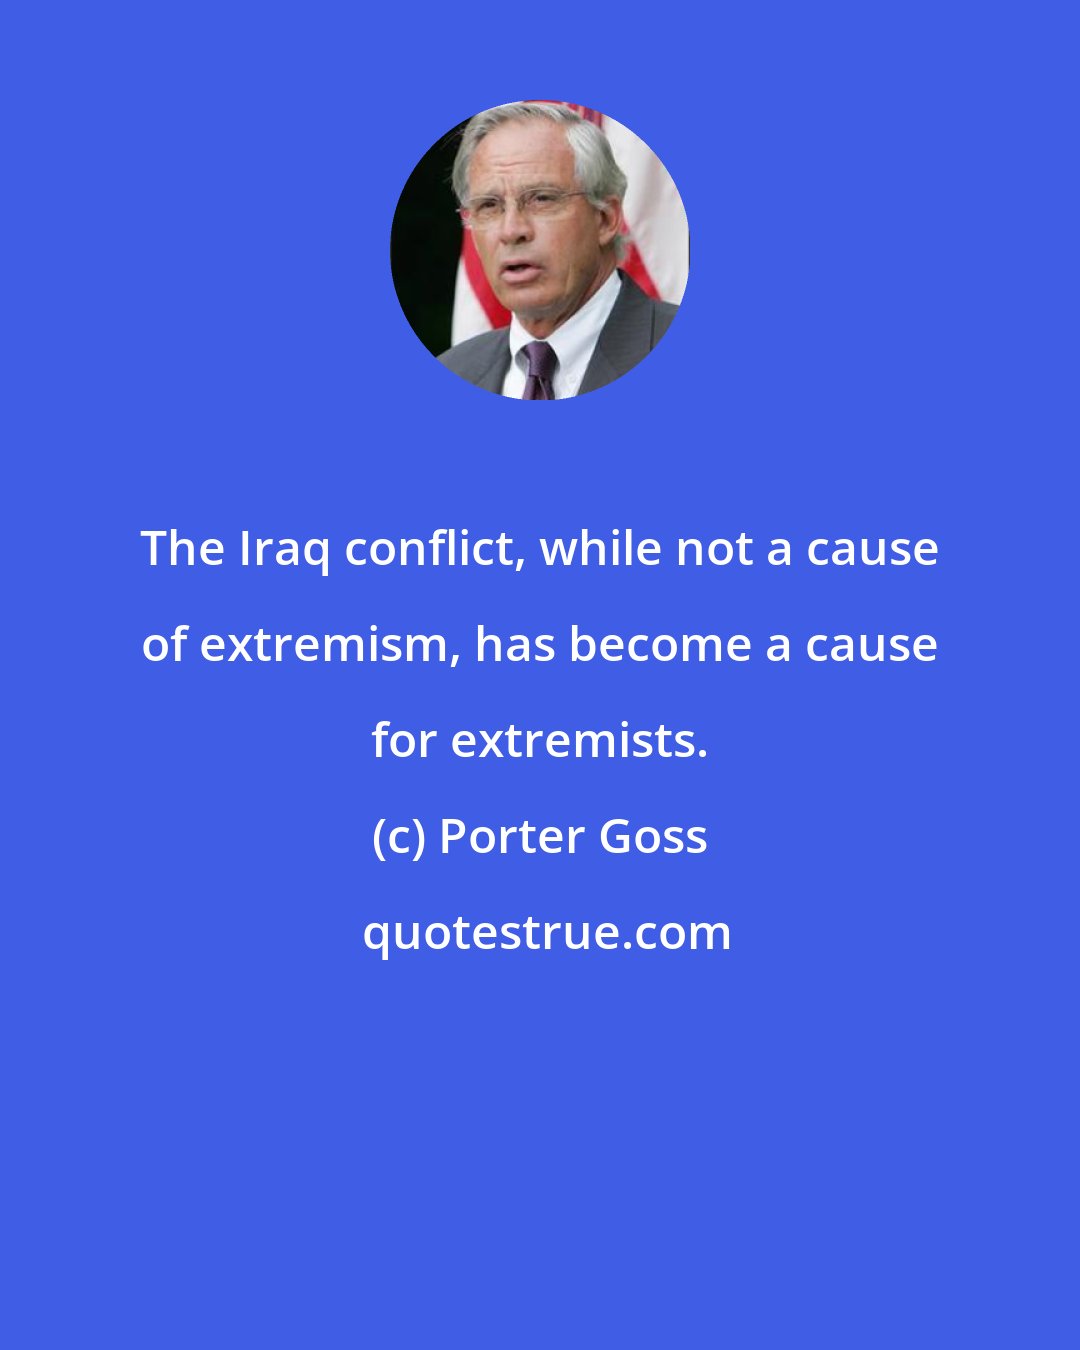 Porter Goss: The Iraq conflict, while not a cause of extremism, has become a cause for extremists.